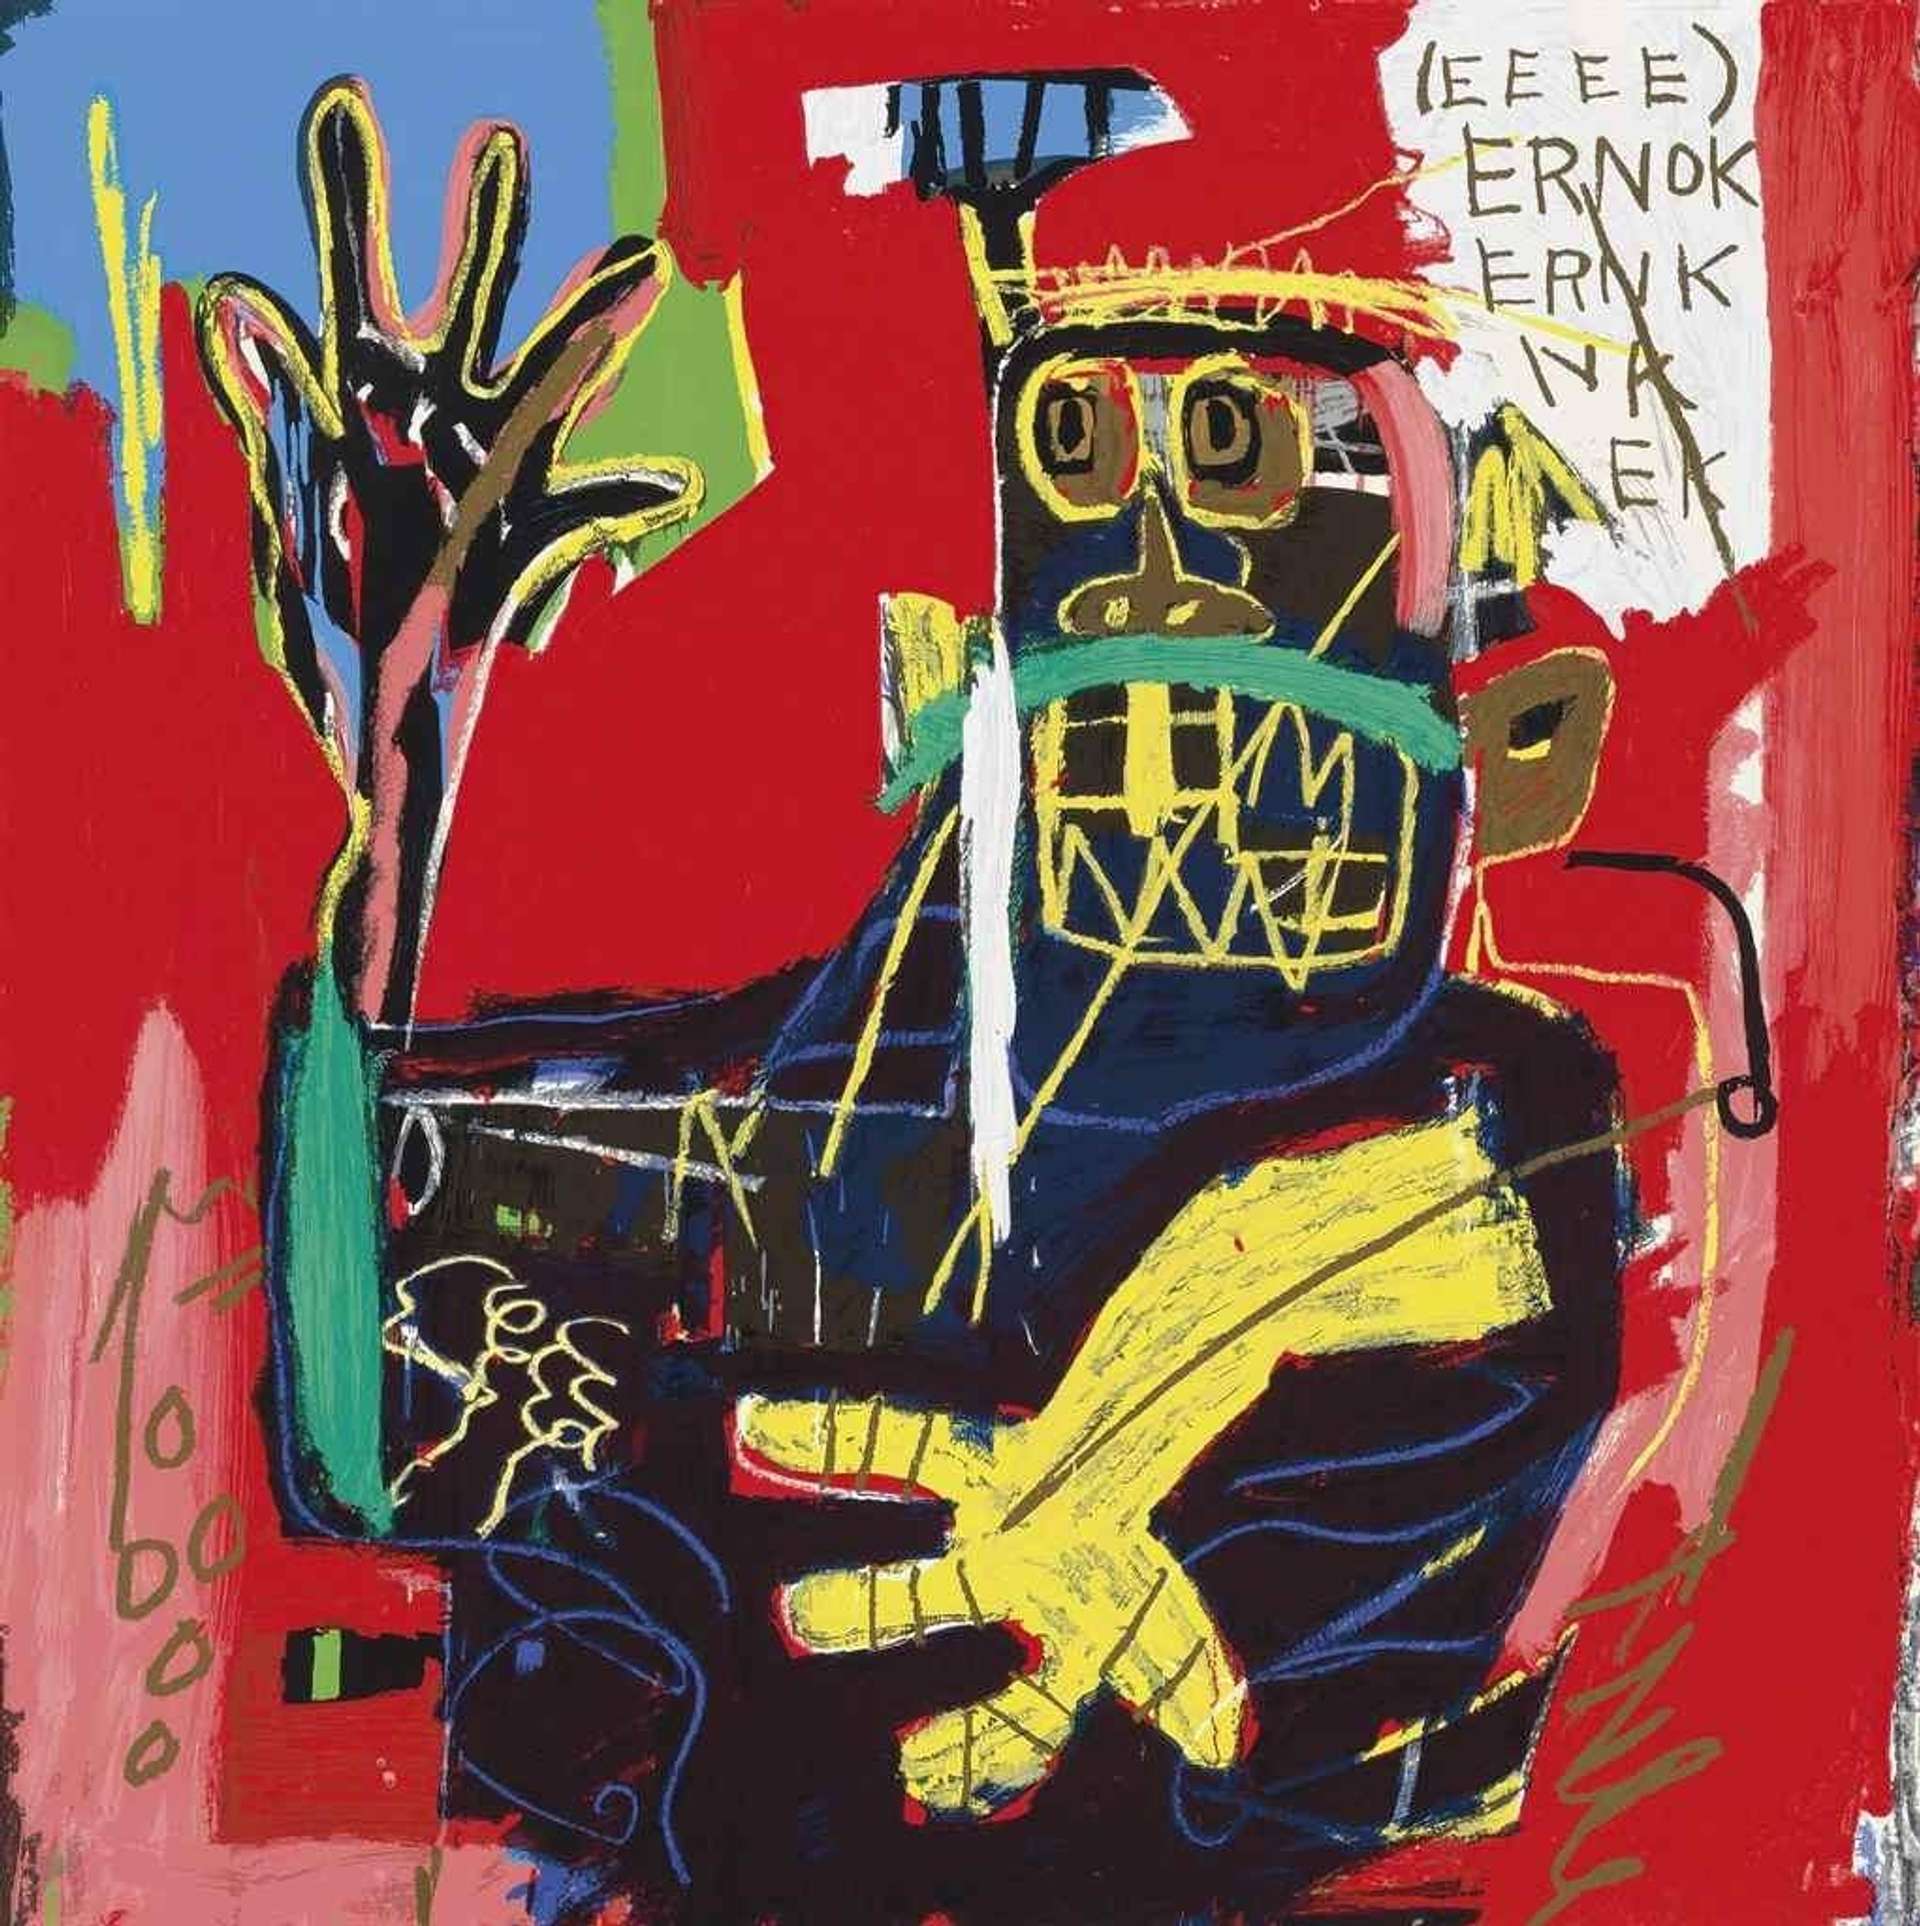 A mixed-media artwork titled "Ernok" by Jean-Michel Basquiat, featuring a central figure surrounded by a collage of text, symbols, and abstract shapes in red, yellows and blues.